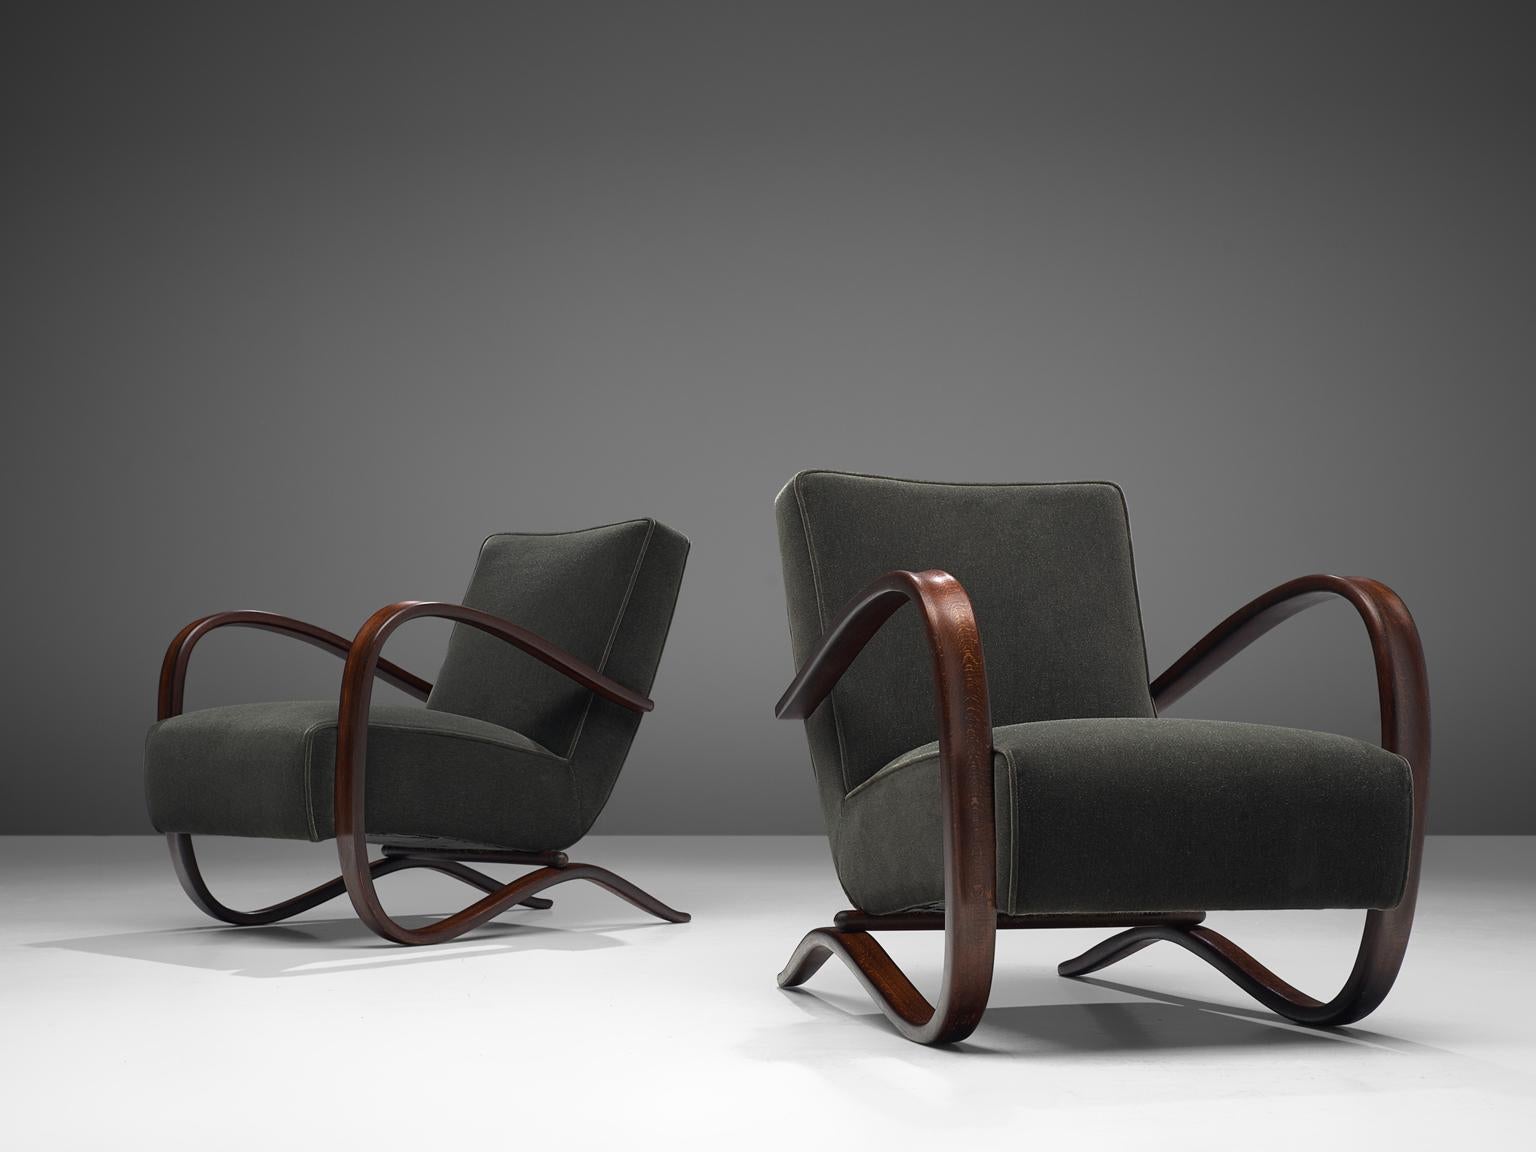 Jindrich Halabala, lounge chairs, mohair fabric and darkened wood, Czech-Republic, 1930s 

These easy chairs are designed by Jindrich Halabala in the 1930s. The main feature of this chair by Hindrich Halabala are the voluptuous curved armrests,